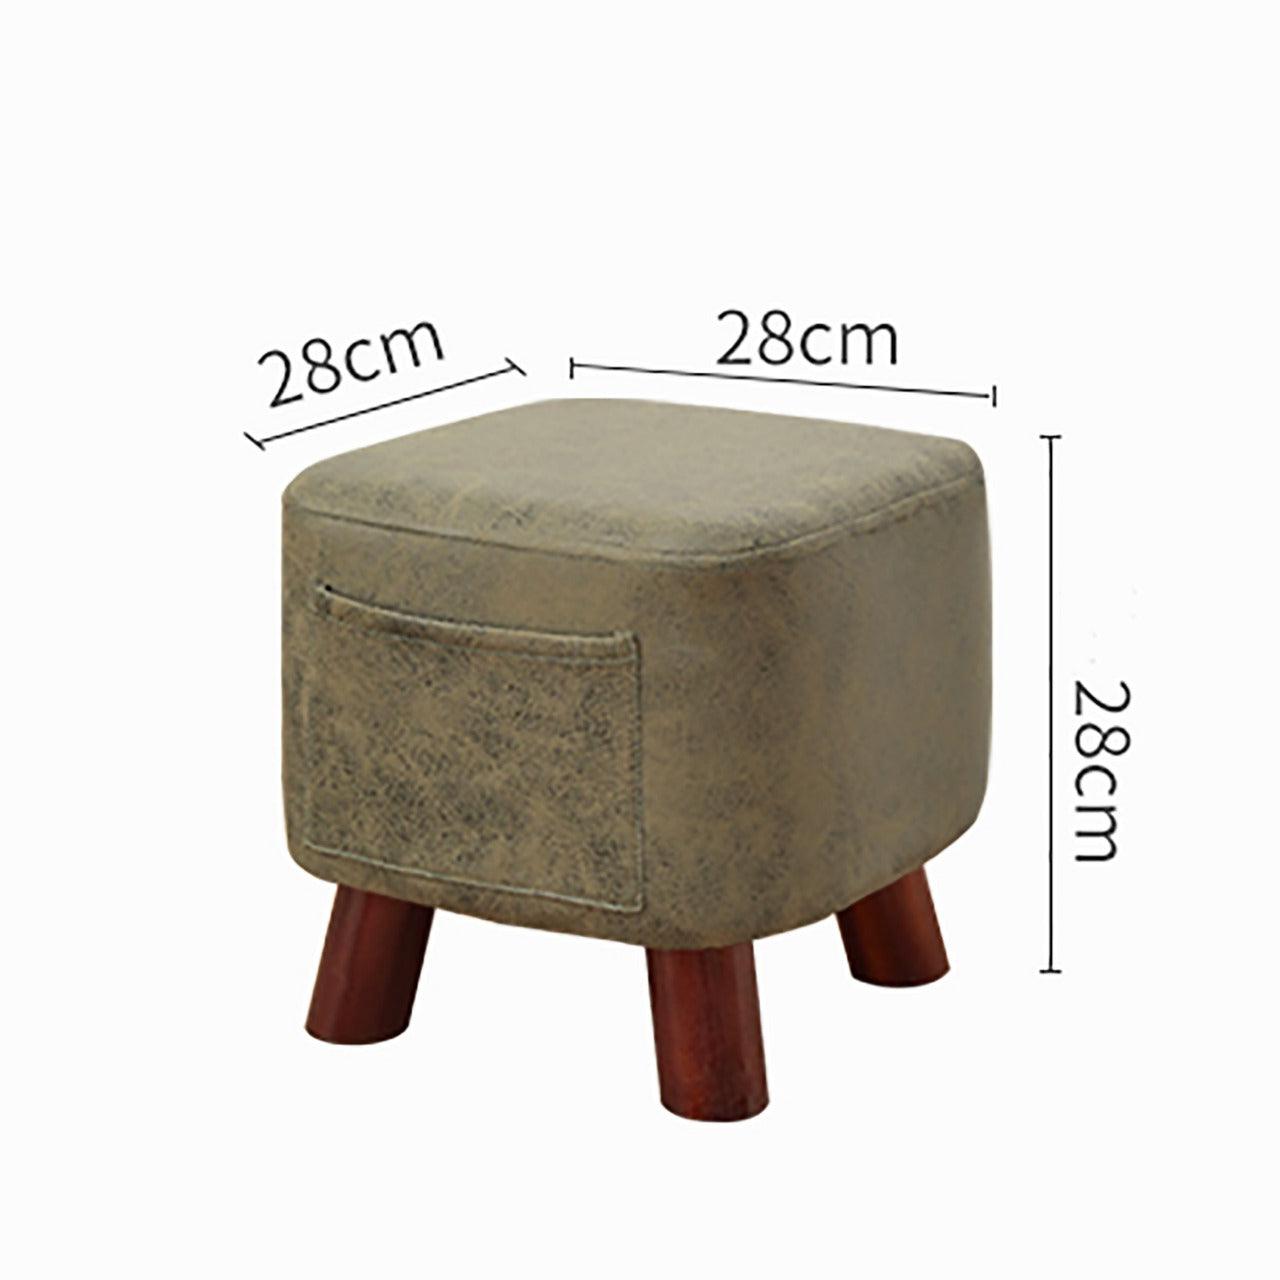 Wooden stool Square shape With Pocket - 145 Small - 92Bedding